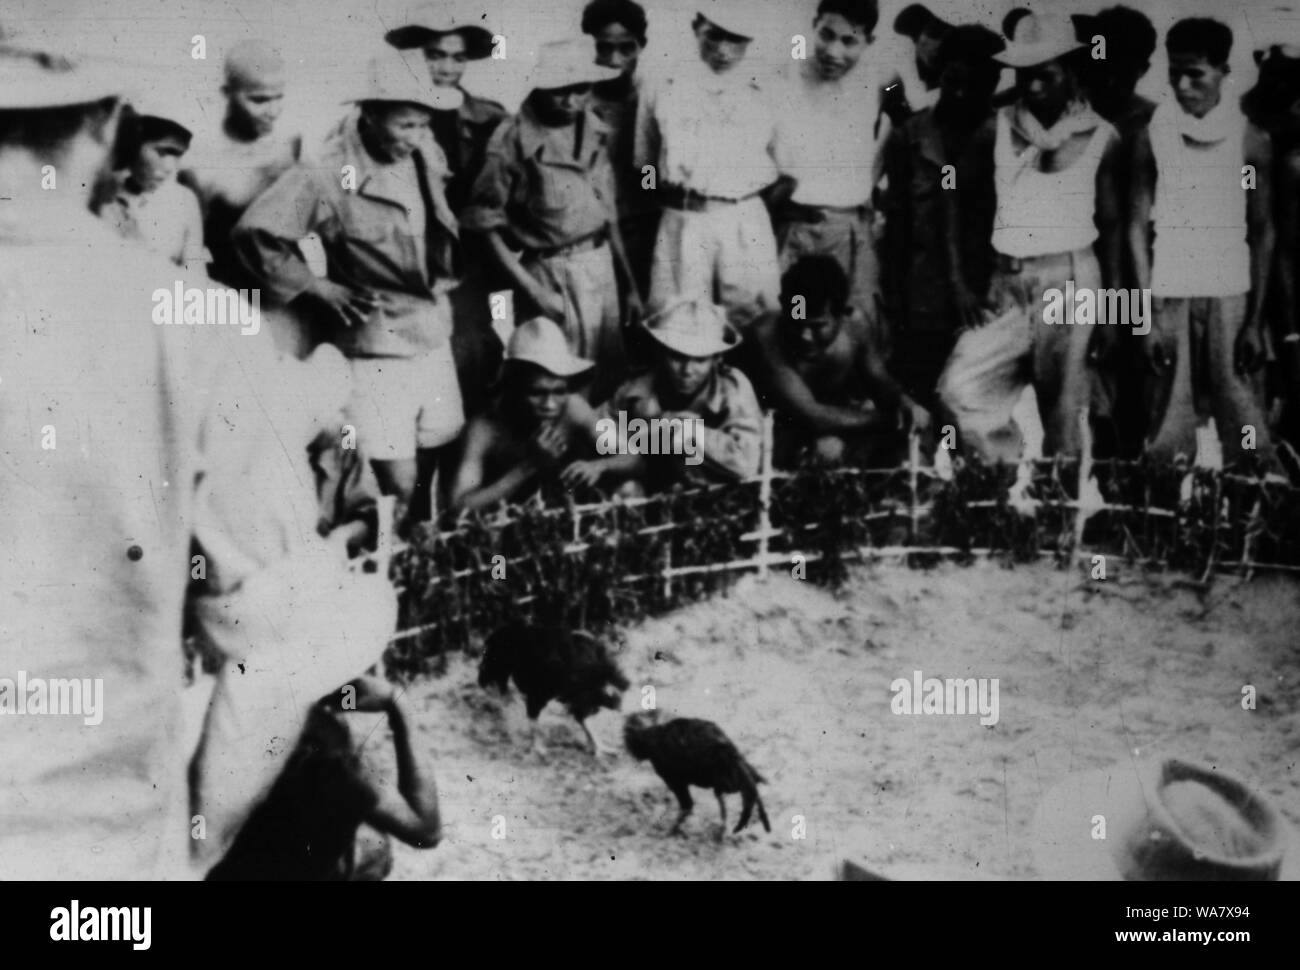 AJAXNETPHOTO. 1953-1957 (APPROX). INDO CHINA. VIETNAM. (IN-COUNTRY LOCATION UNKNOWN.) - GROUP WATCHING COCKFIGHTING.   PHOTO:JEAN CORRE/AJAXREFRX7 191508 230 Stock Photo